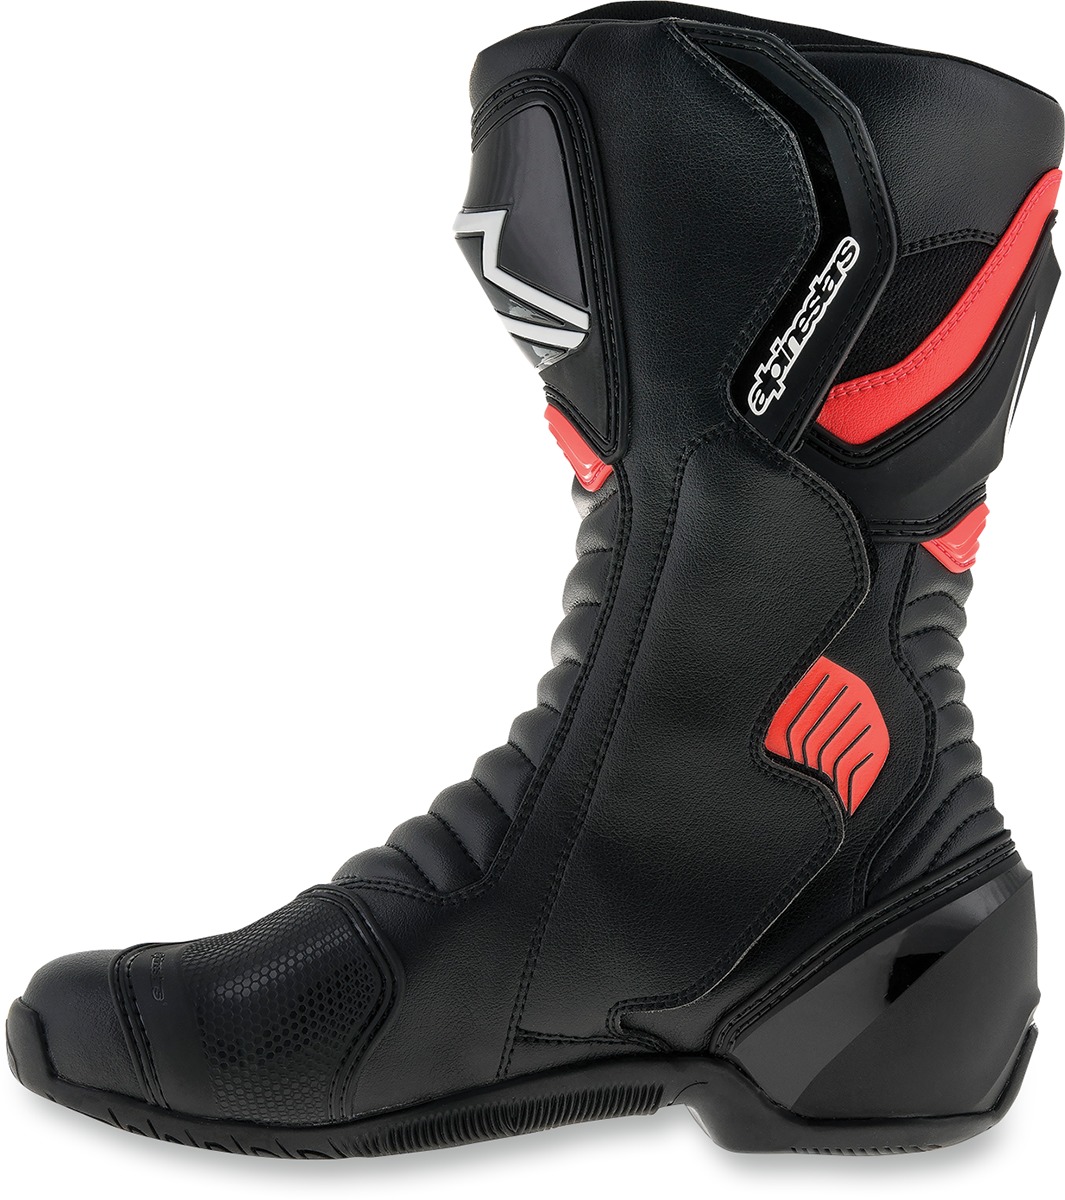 SMX-6 Drystar V2 Street Riding Boots Black/Red US 7.5 - Click Image to Close